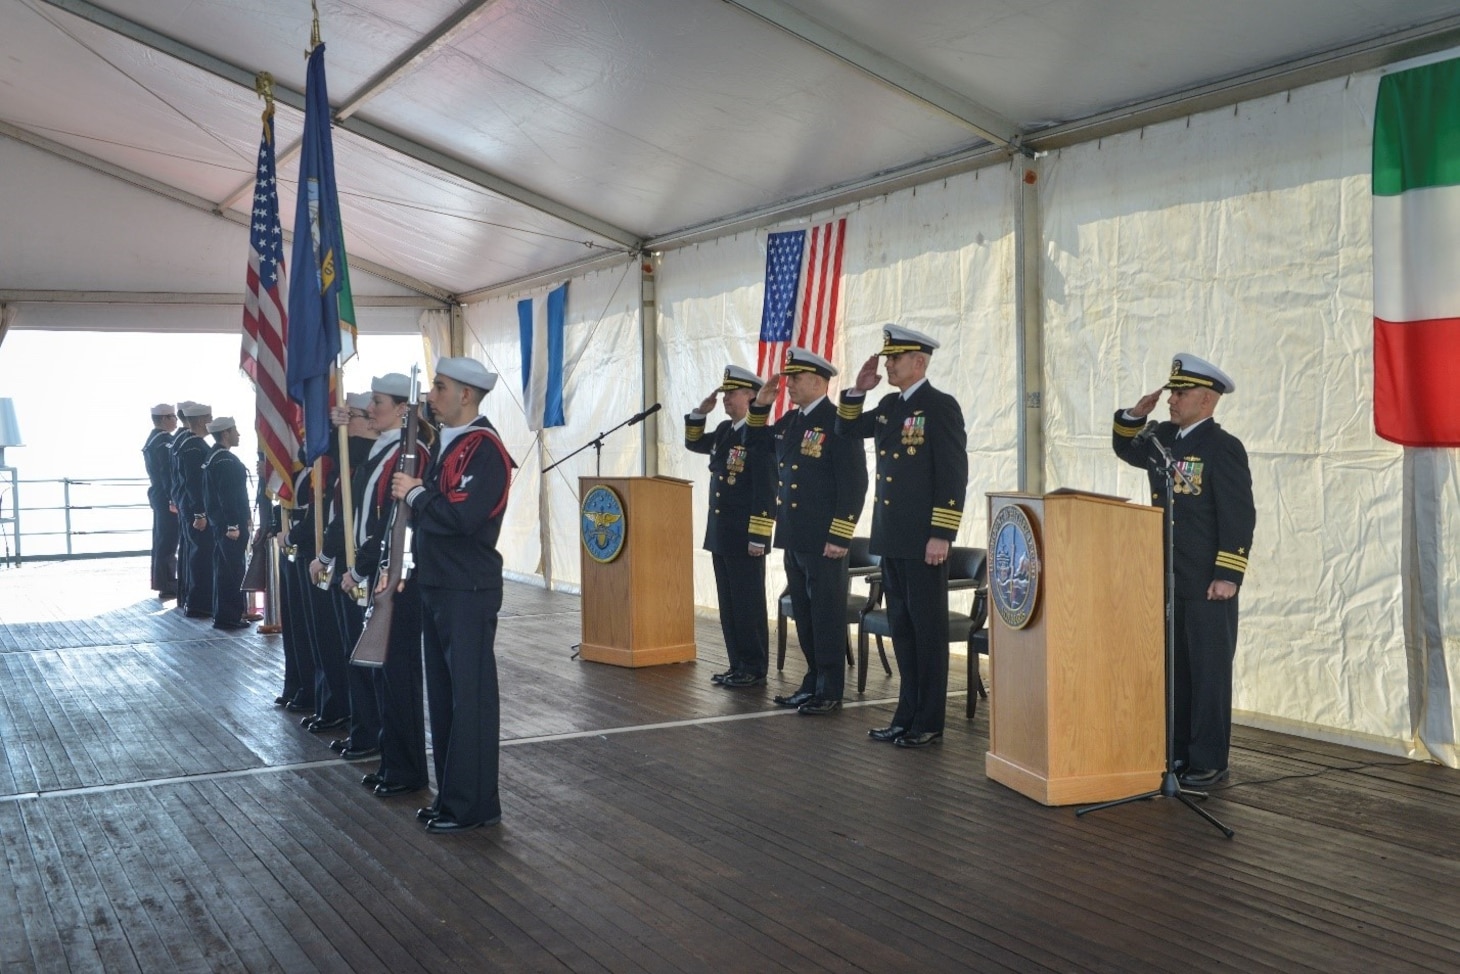 (April 11, 2023) Vice Adm. Thomas Ishee, commander, U.S. Sixth Fleet, Capt. Daniel Prochazka, commanding officer of the Blue Ridge-class command and control ship USS Mount Whitney (LCC 20), and Capt. Matthew Kiser, salutes during a change of command in Gaeta, Italy, April 11, 2023. Mount Whitney, the U.S. Sixth Fleet flagship, homeported in Gaeta, Italy entered its regularly scheduled overhaul to make improvements in order to increase the security and stability of the U.S. Sixth Fleet area of operations.